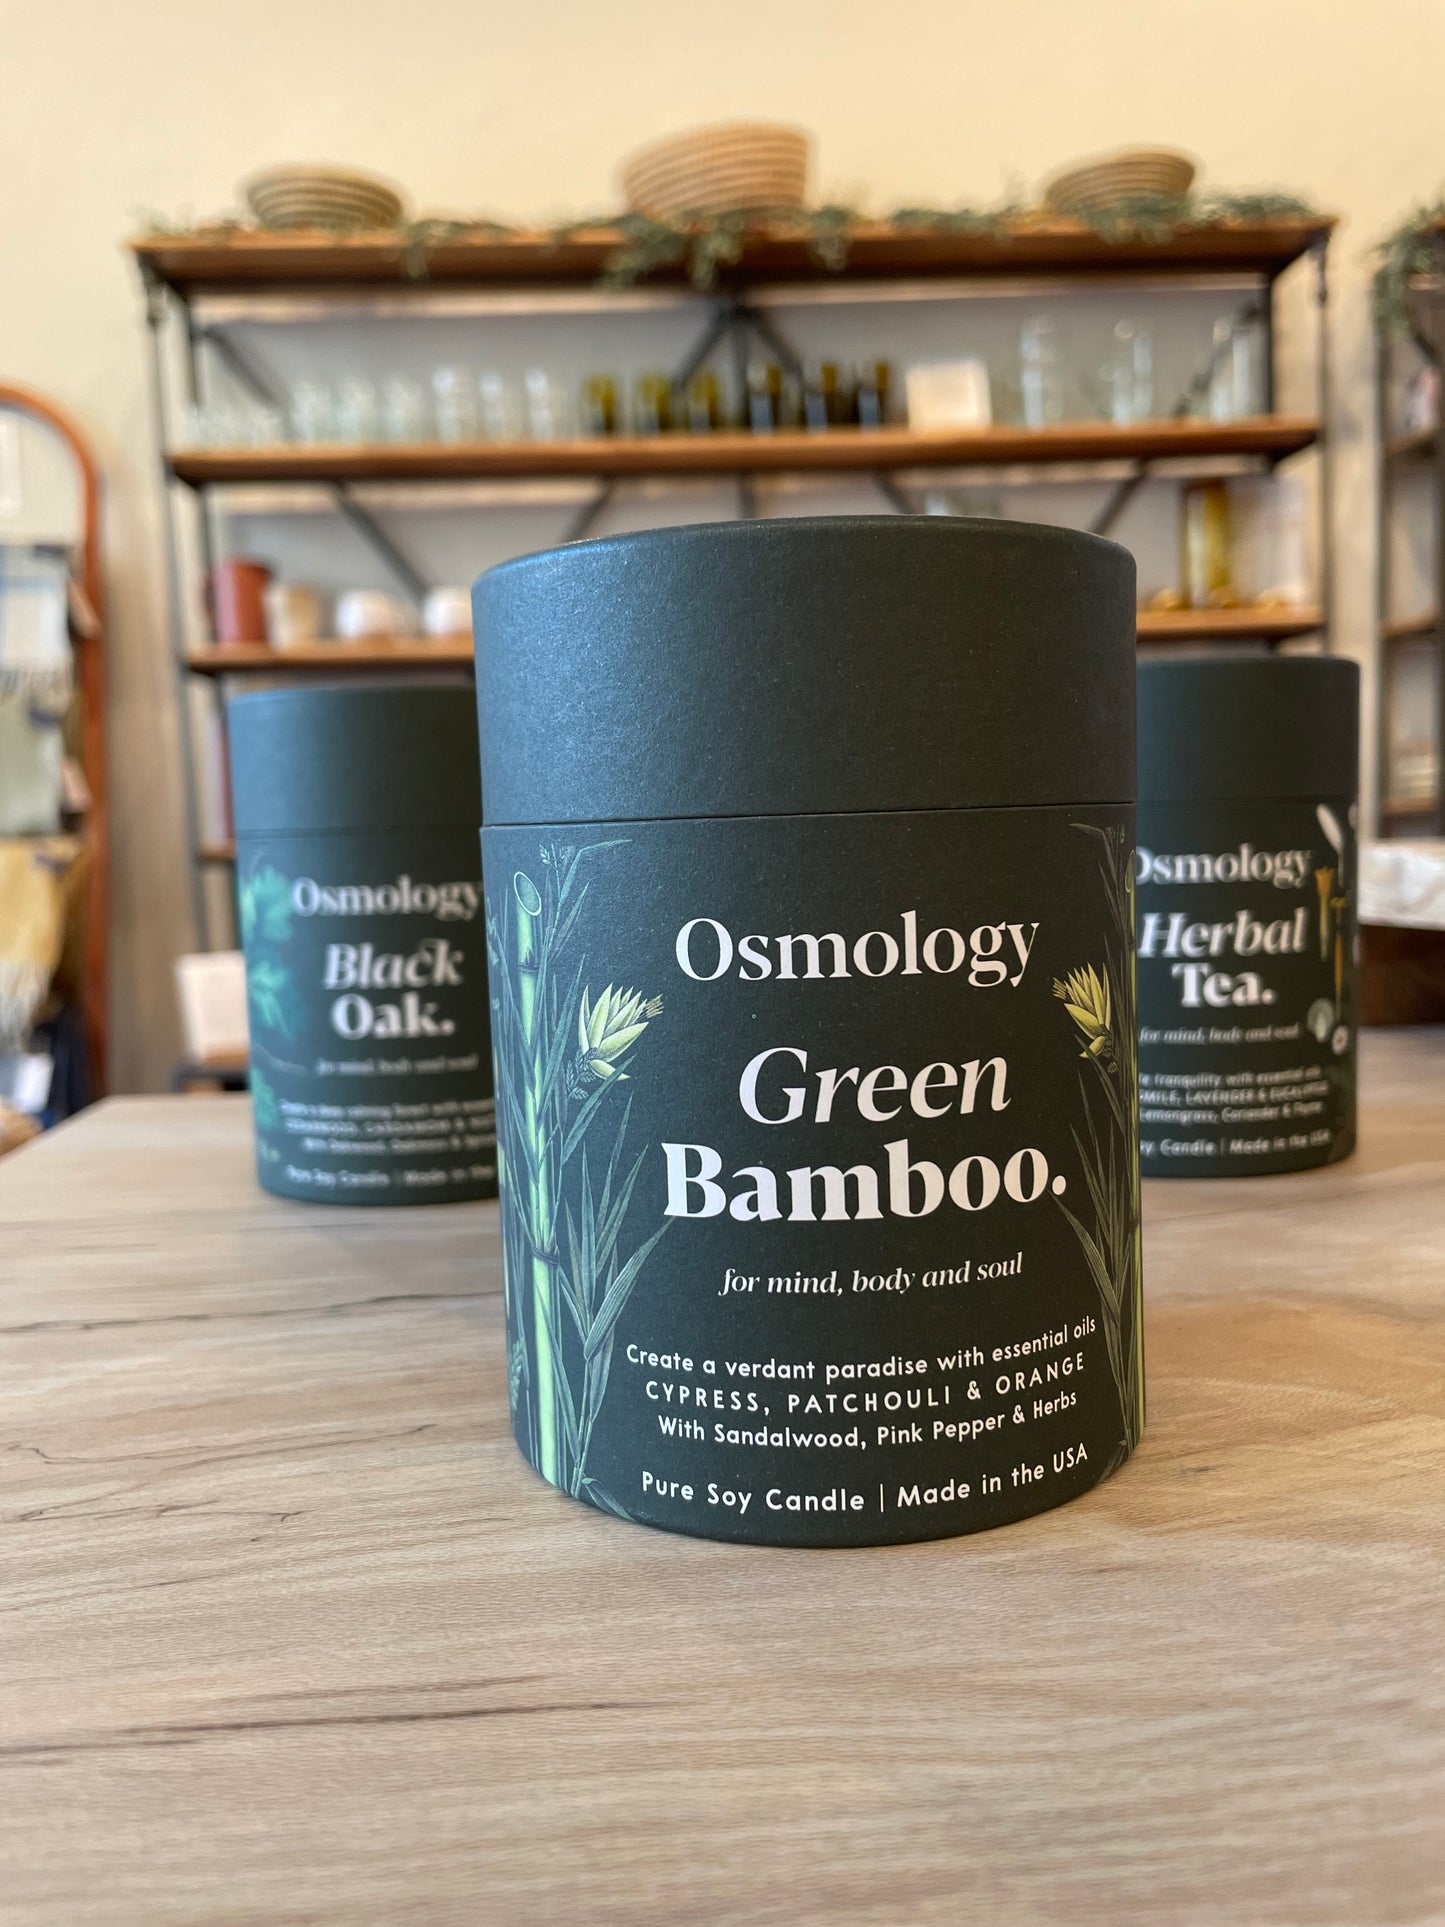 Osmology - Pure Soy Candle - Green Bamboo